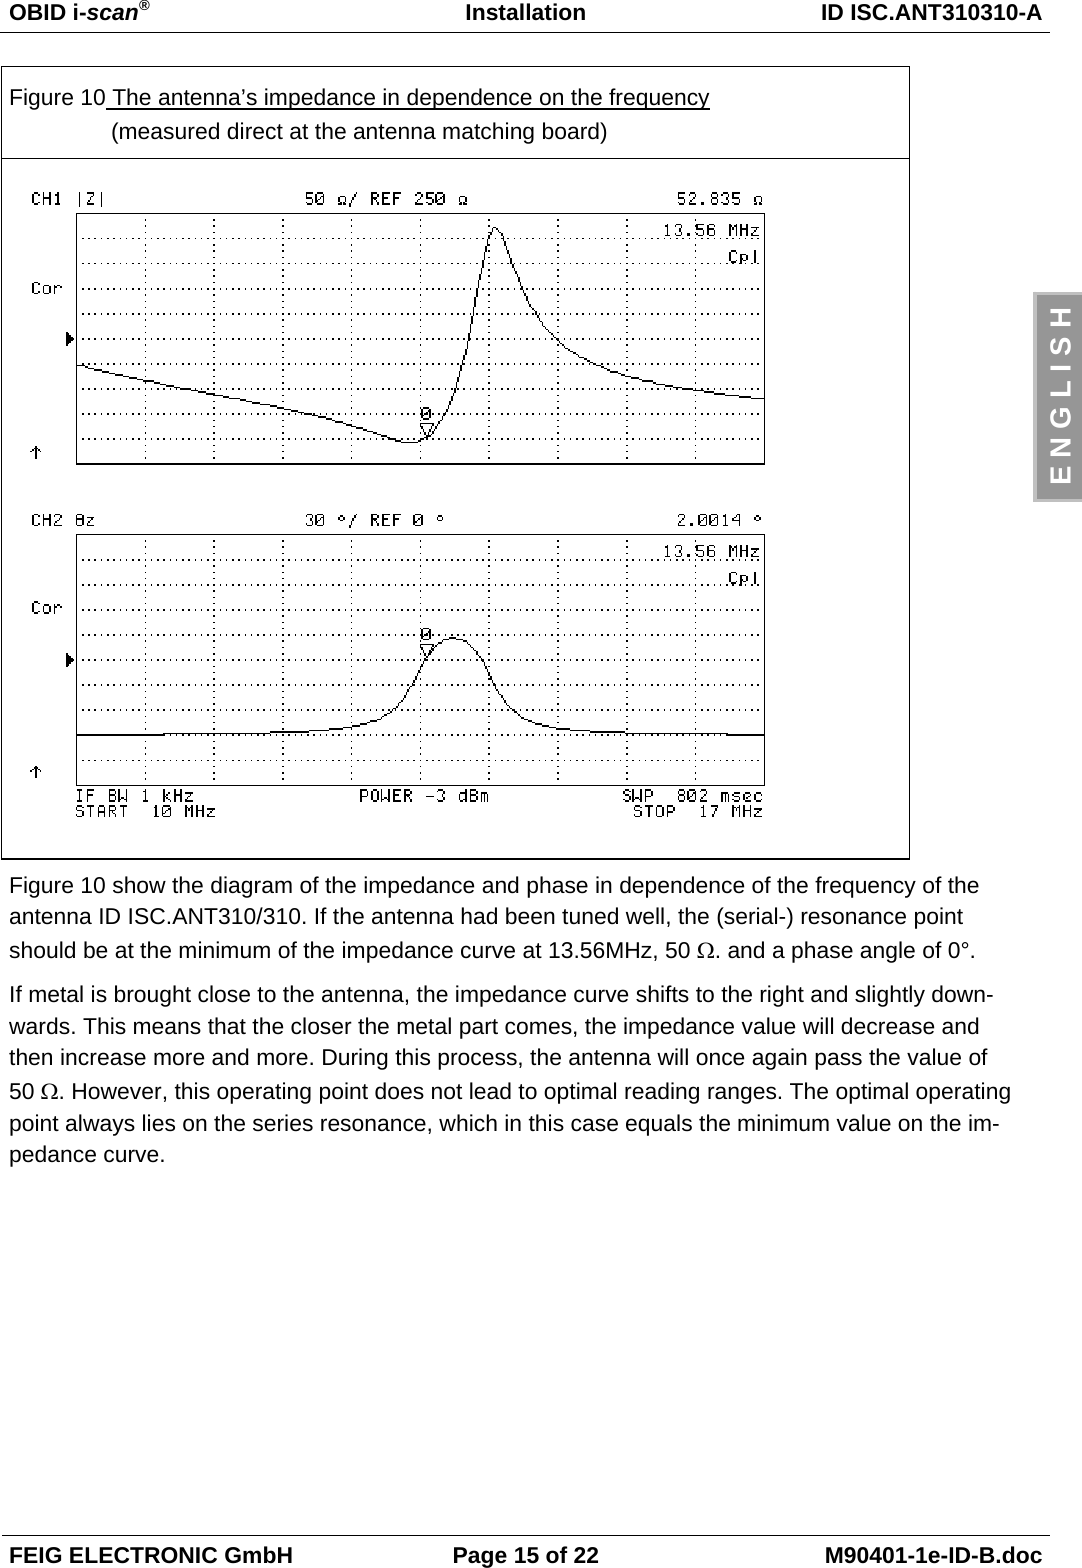 OBID i-scan®  Installation ID ISC.ANT310310-A FEIG ELECTRONIC GmbH  Page 15 of 22  M90401-1e-ID-B.doc E N G L I S H Figure 10 The antenna’s impedance in dependence on the frequency                 (measured direct at the antenna matching board)  Figure 10 show the diagram of the impedance and phase in dependence of the frequency of the antenna ID ISC.ANT310/310. If the antenna had been tuned well, the (serial-) resonance point  should be at the minimum of the impedance curve at 13.56MHz, 50 Ω. and a phase angle of 0°. If metal is brought close to the antenna, the impedance curve shifts to the right and slightly down-wards. This means that the closer the metal part comes, the impedance value will decrease and then increase more and more. During this process, the antenna will once again pass the value of 50 Ω. However, this operating point does not lead to optimal reading ranges. The optimal operating point always lies on the series resonance, which in this case equals the minimum value on the im-pedance curve.   